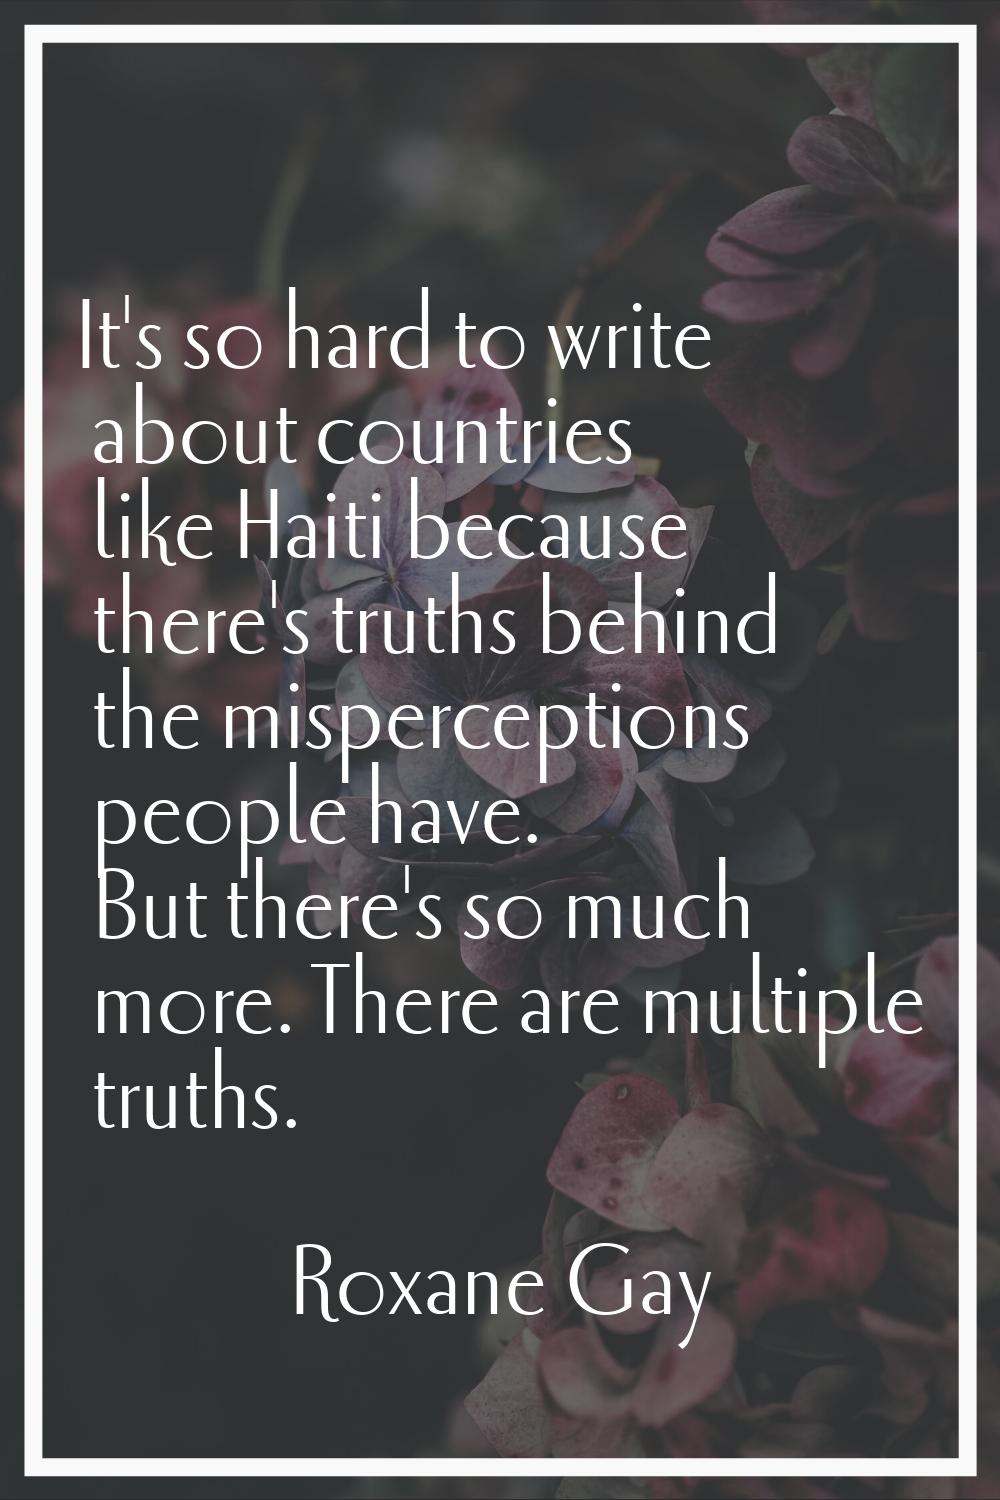 It's so hard to write about countries like Haiti because there's truths behind the misperceptions p